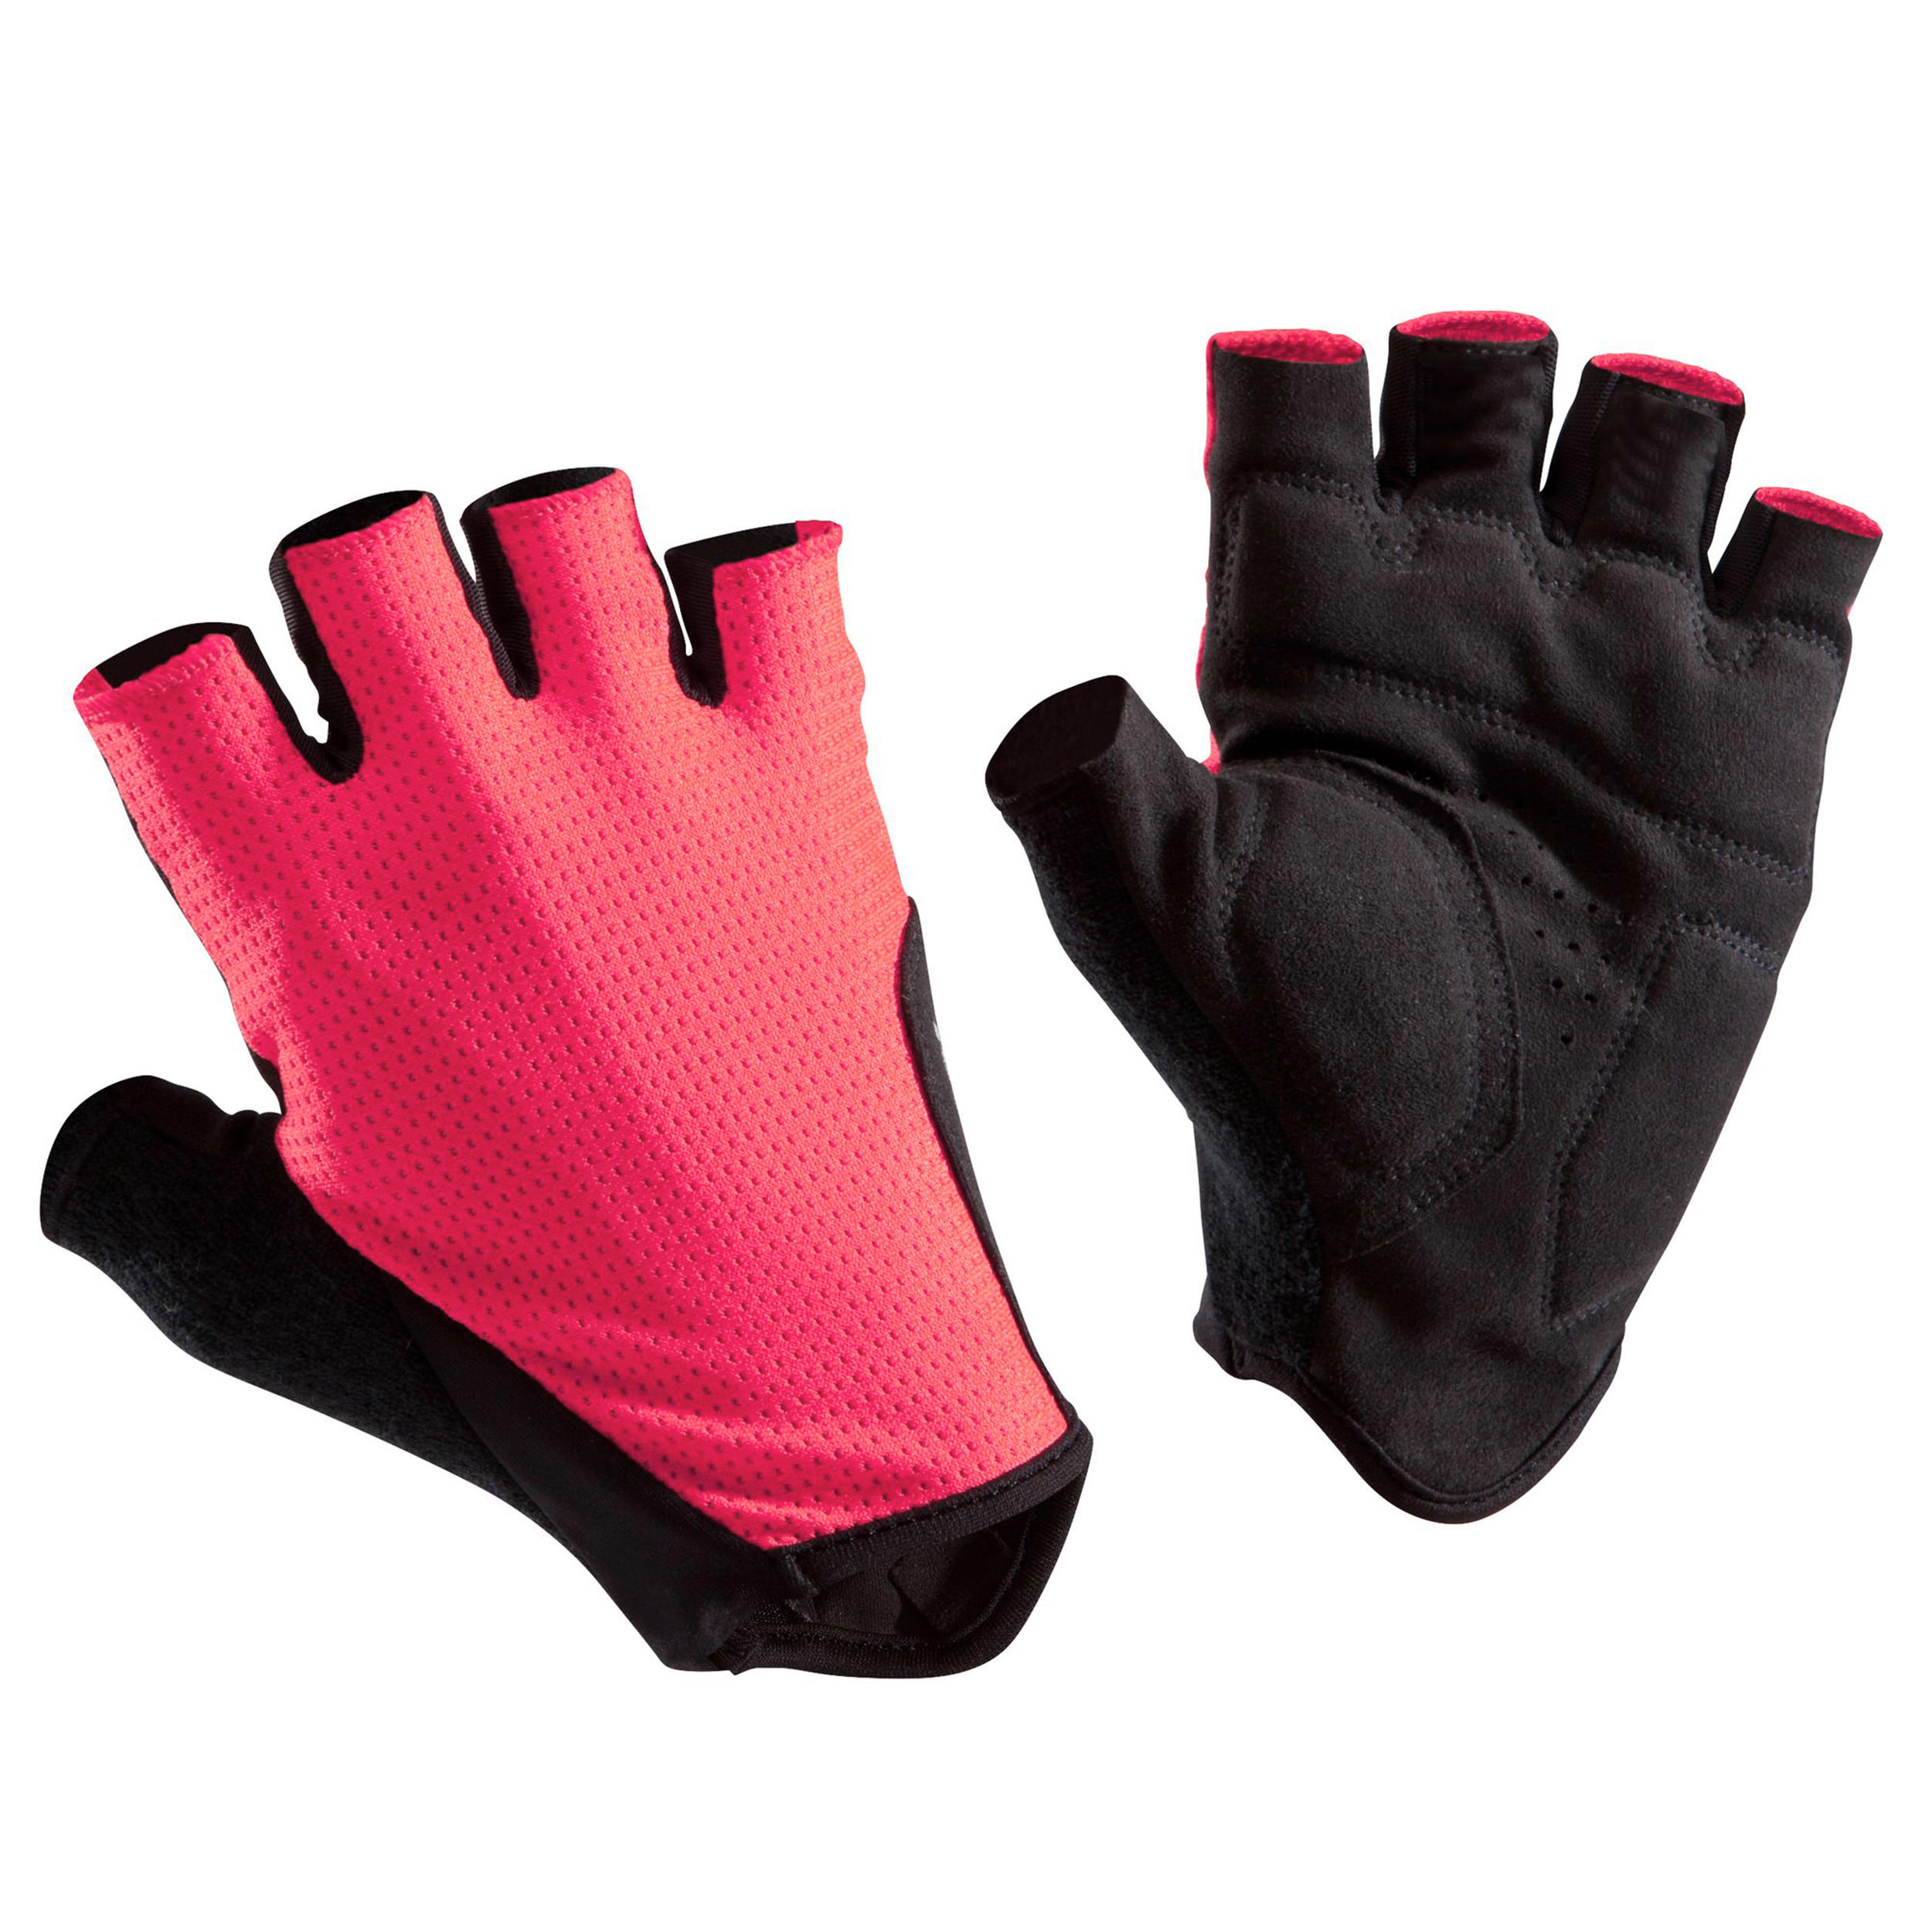 Road Cycling Gloves 500 Neon Pink 